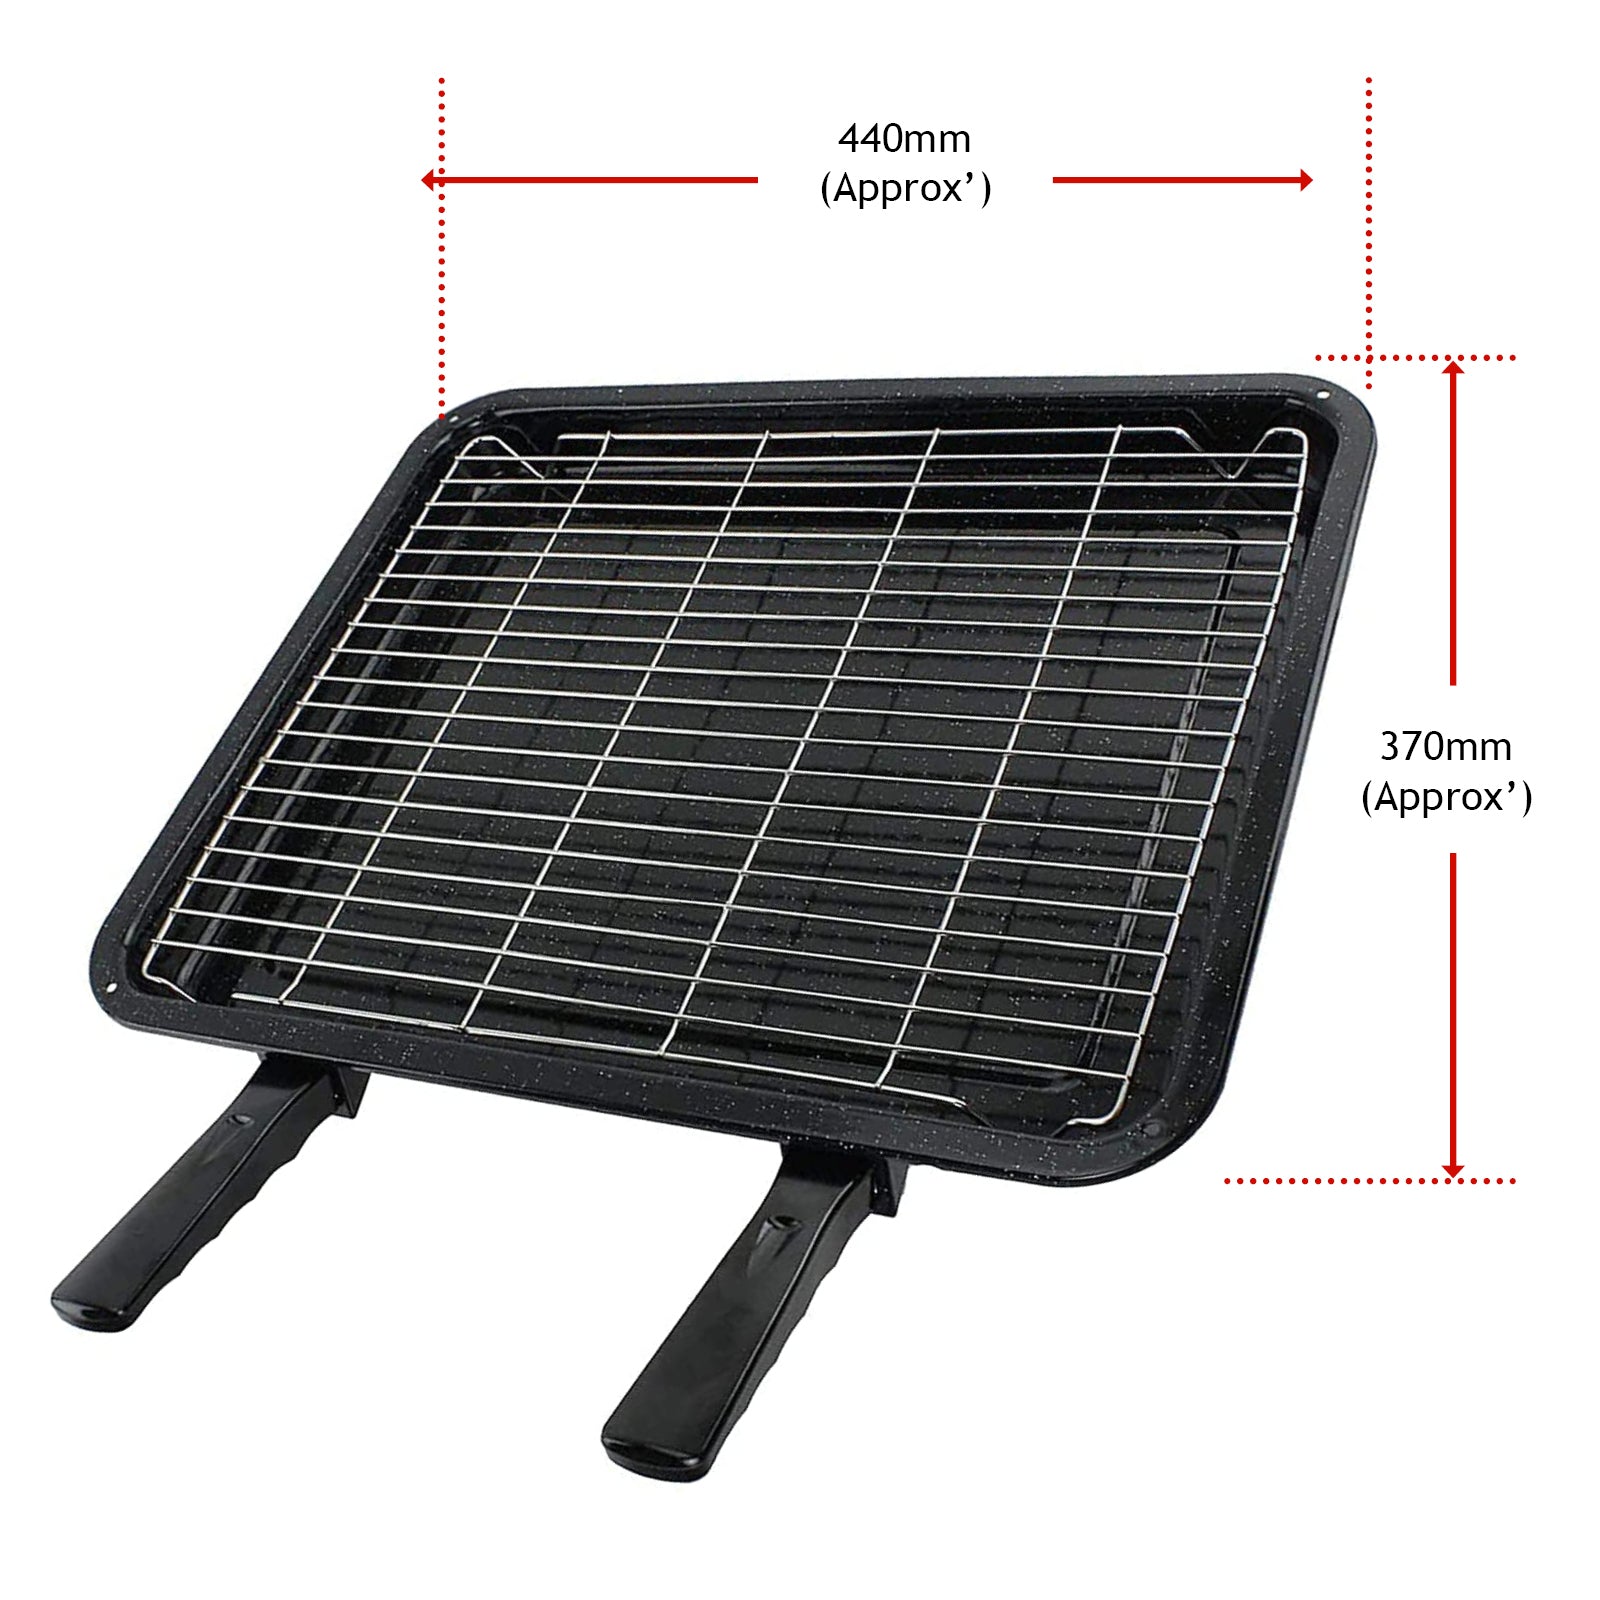 SPARES2GO Small Grill Pan UNIVERSAL Rack Detachable Handle for